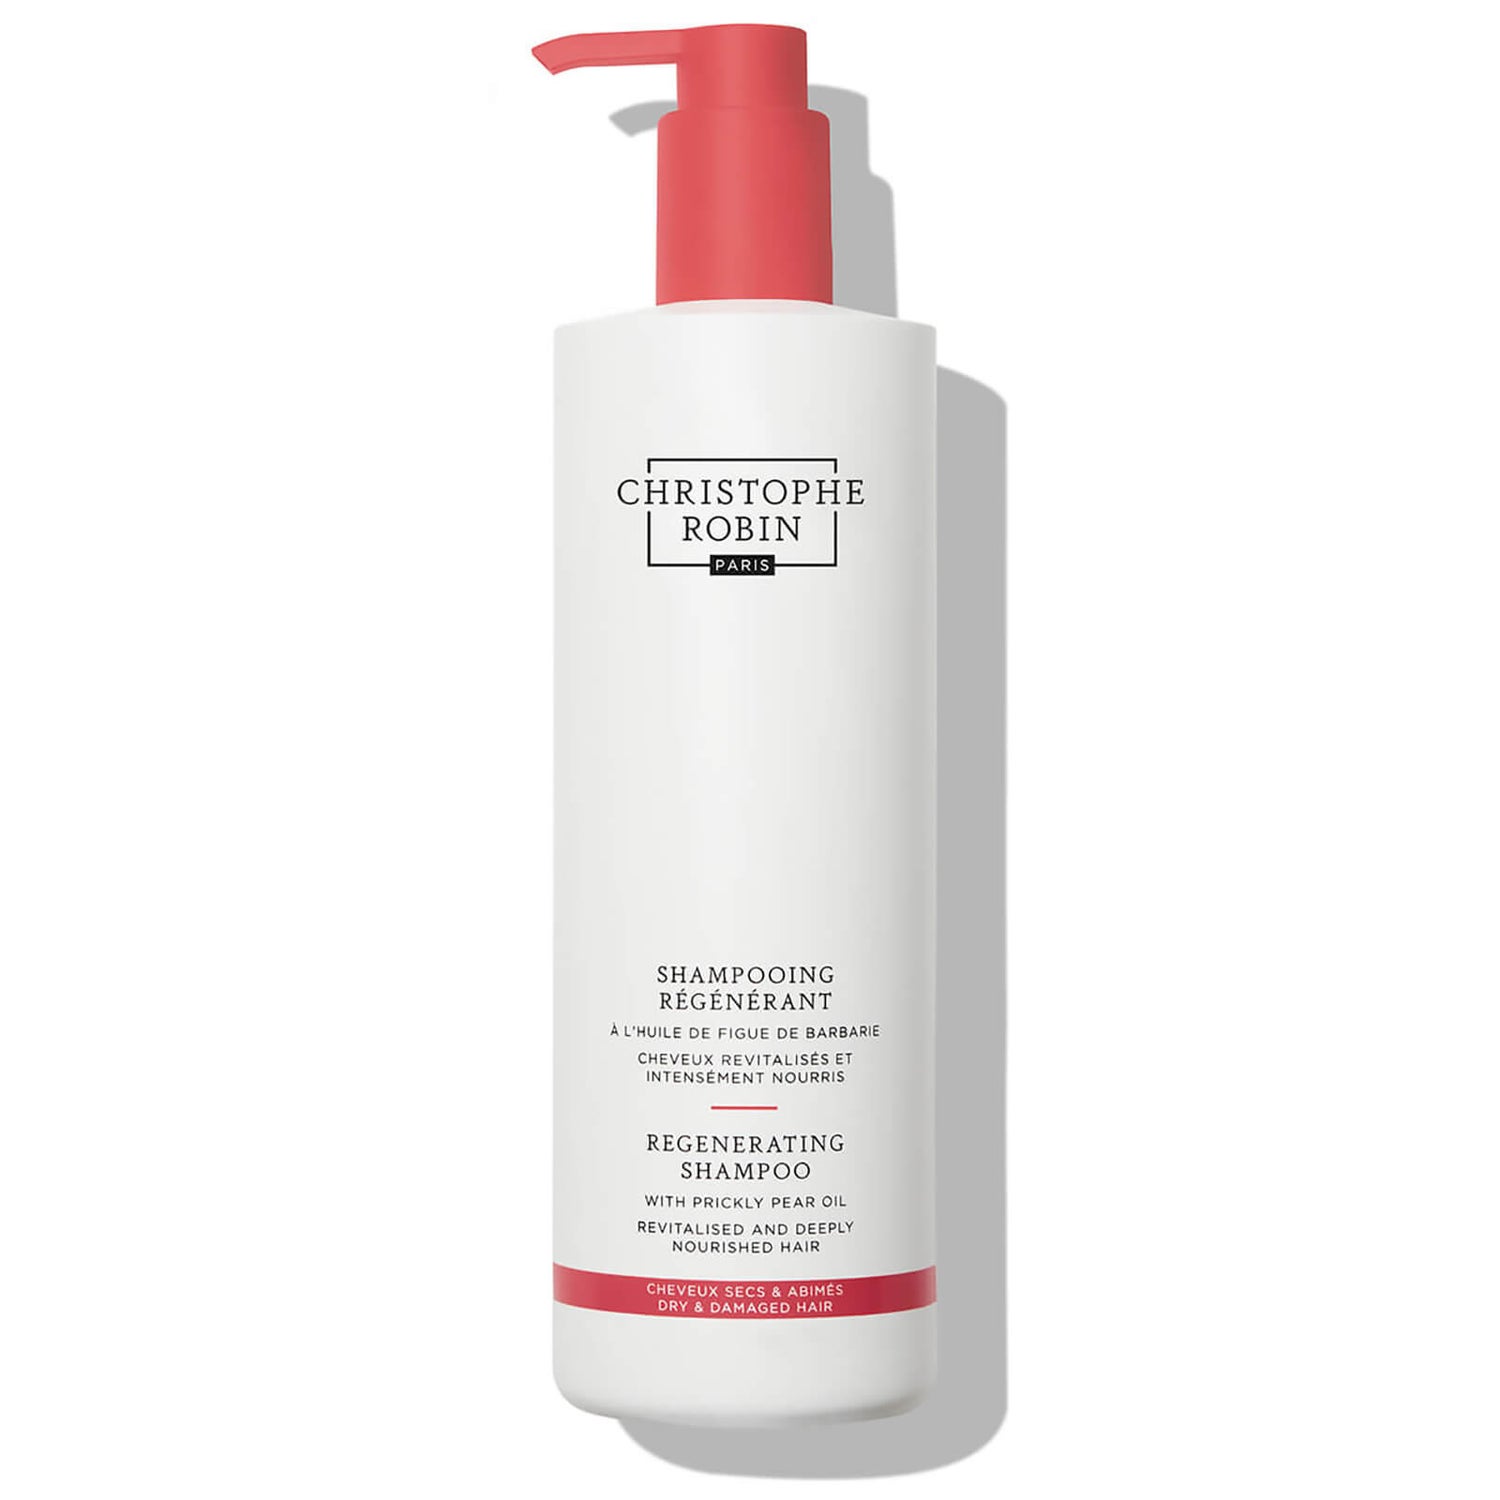 Christophe Robin Regenerating Shampoo with Prickly Pear Oil 500ml (Worth £62.00)